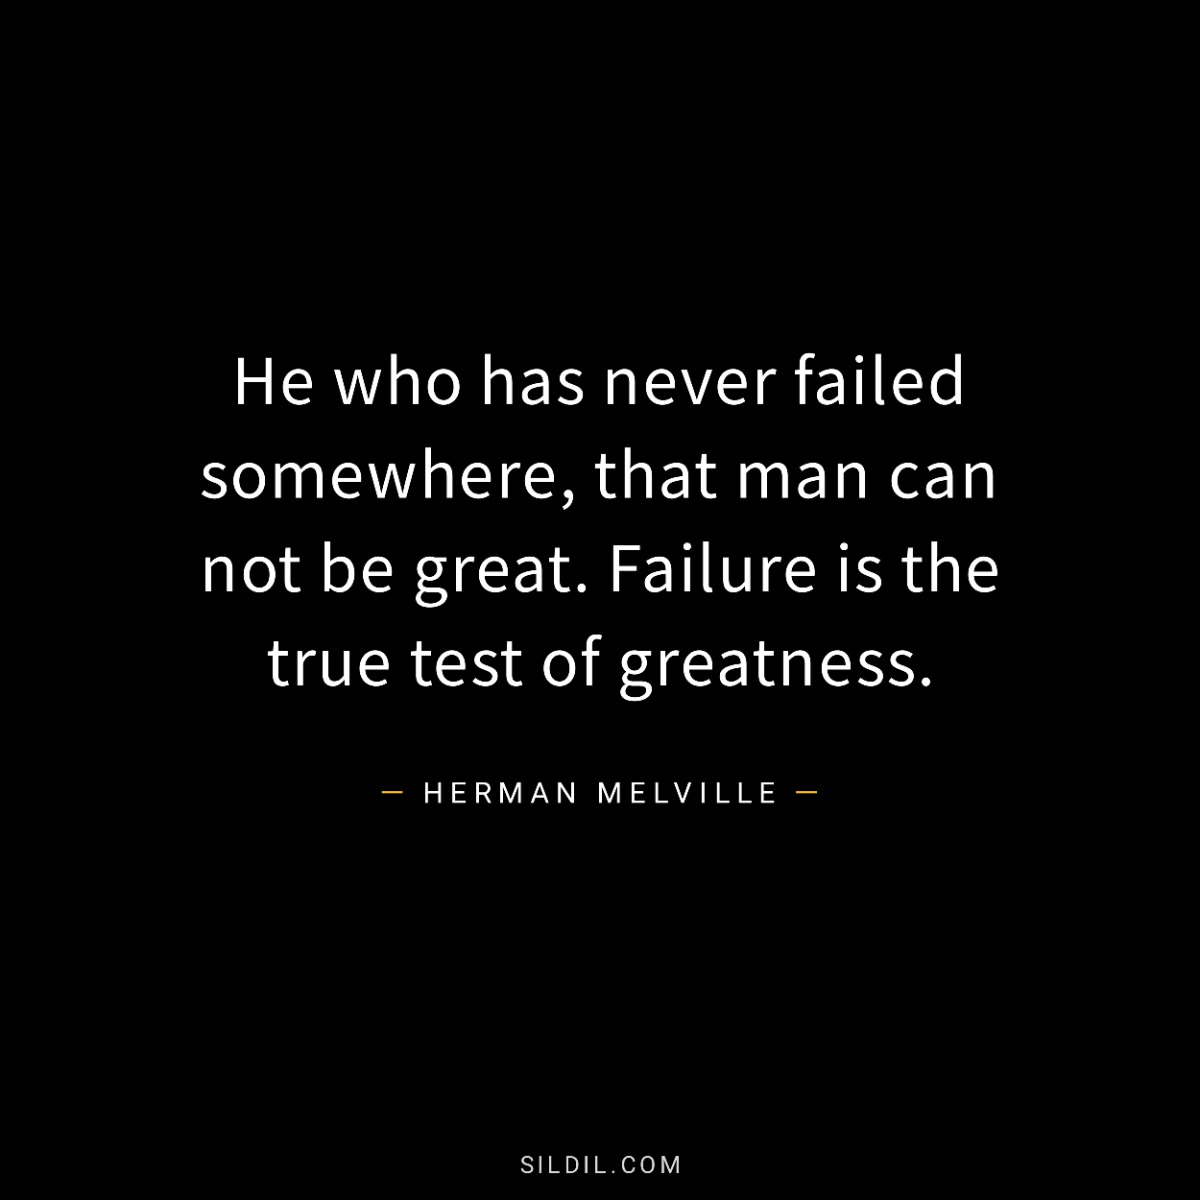 He who has never failed somewhere, that man can not be great. Failure is the true test of greatness.